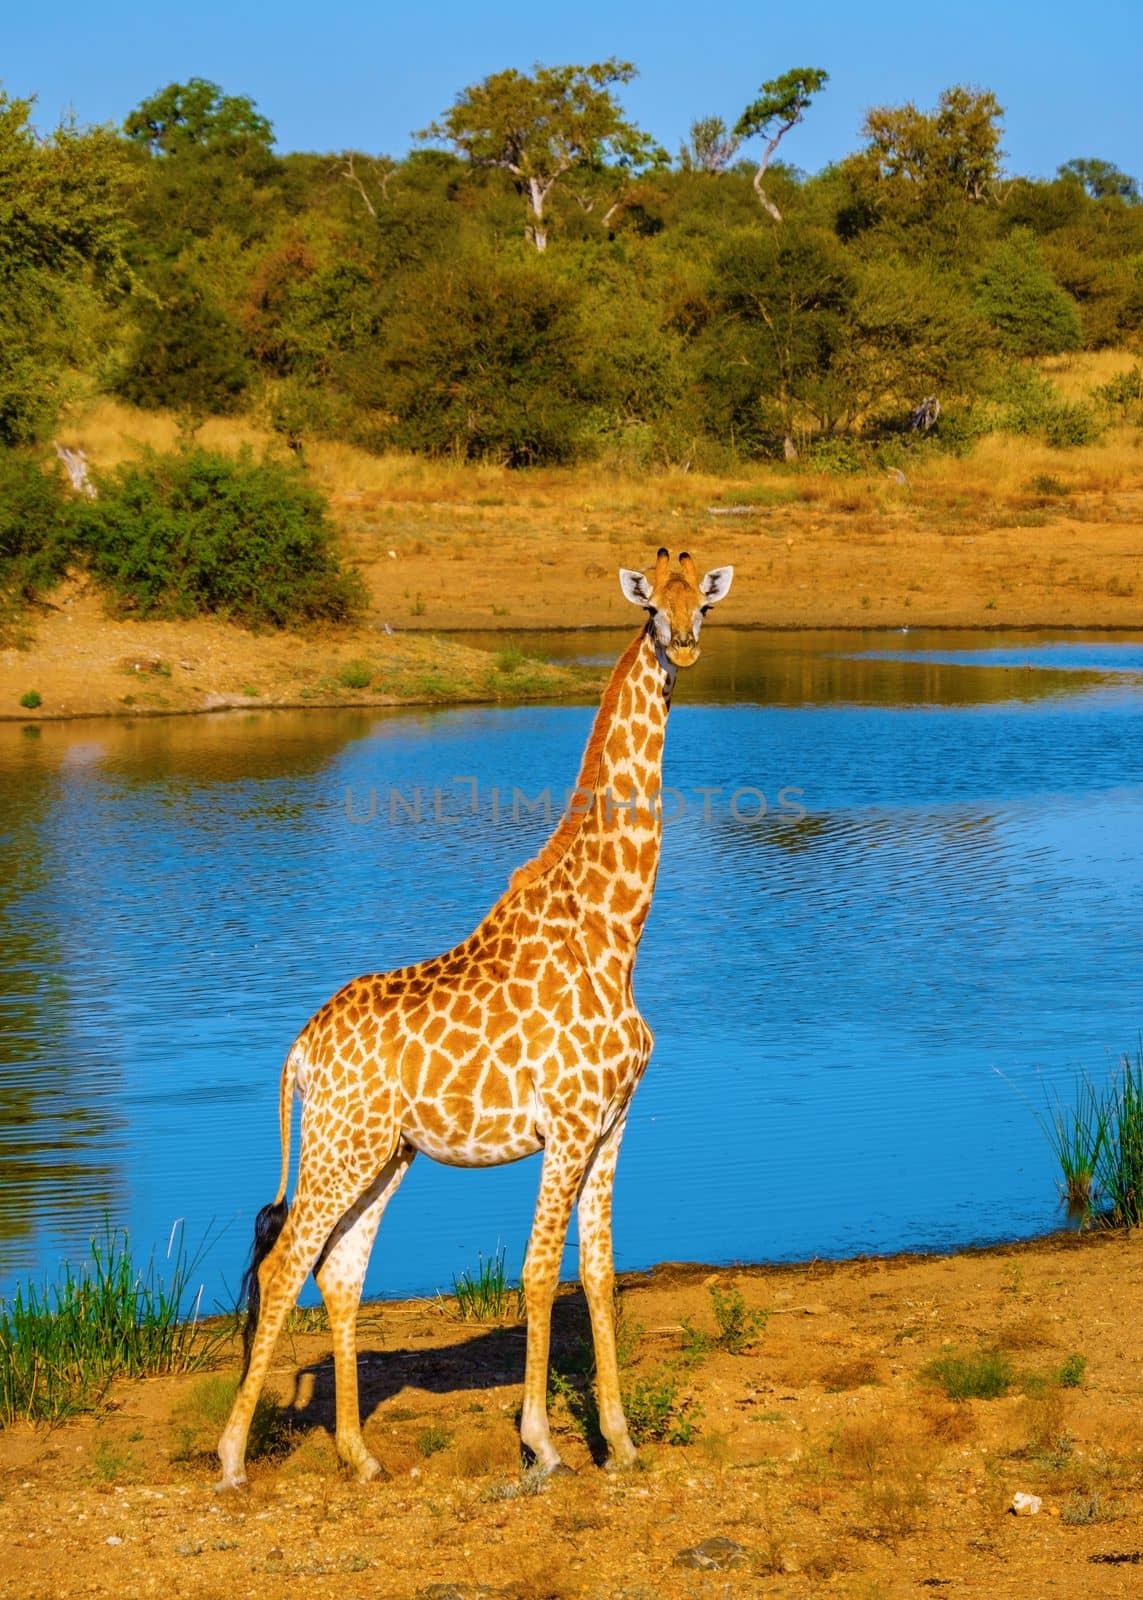 Giraffe at a Savannah landscape during sunset in South Africa at The Klaserie Private Nature Reserve by fokkebok